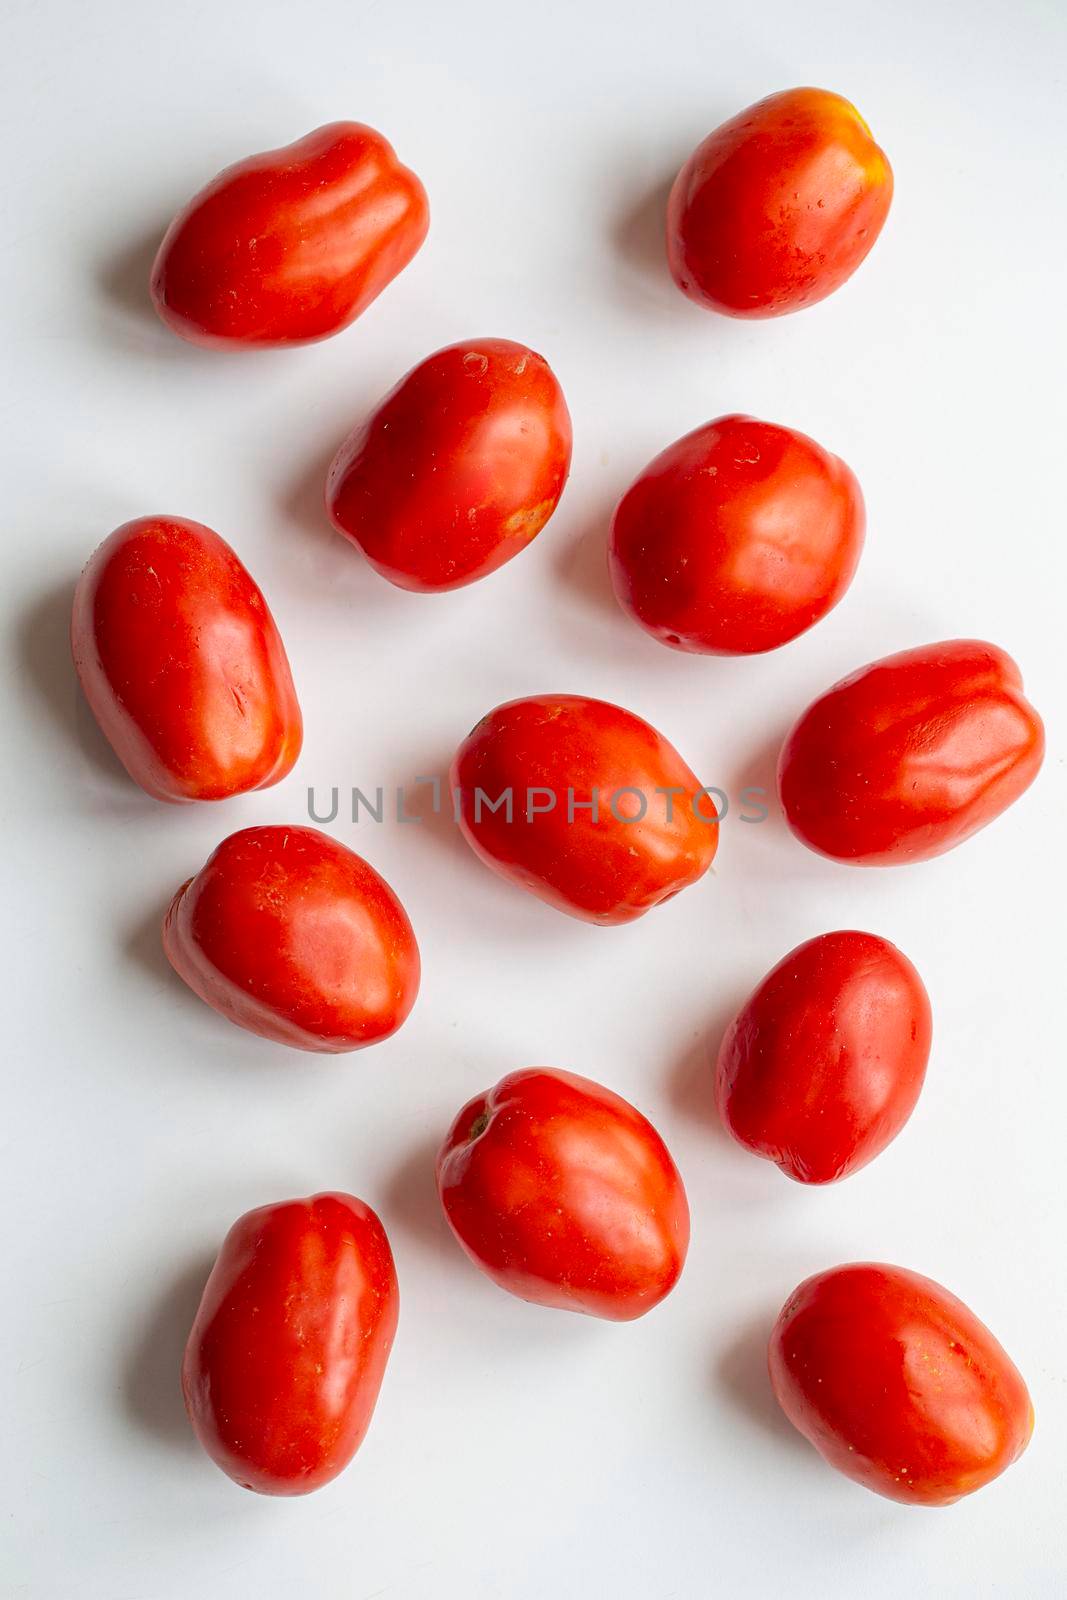 A few tomatoes closeup on white background